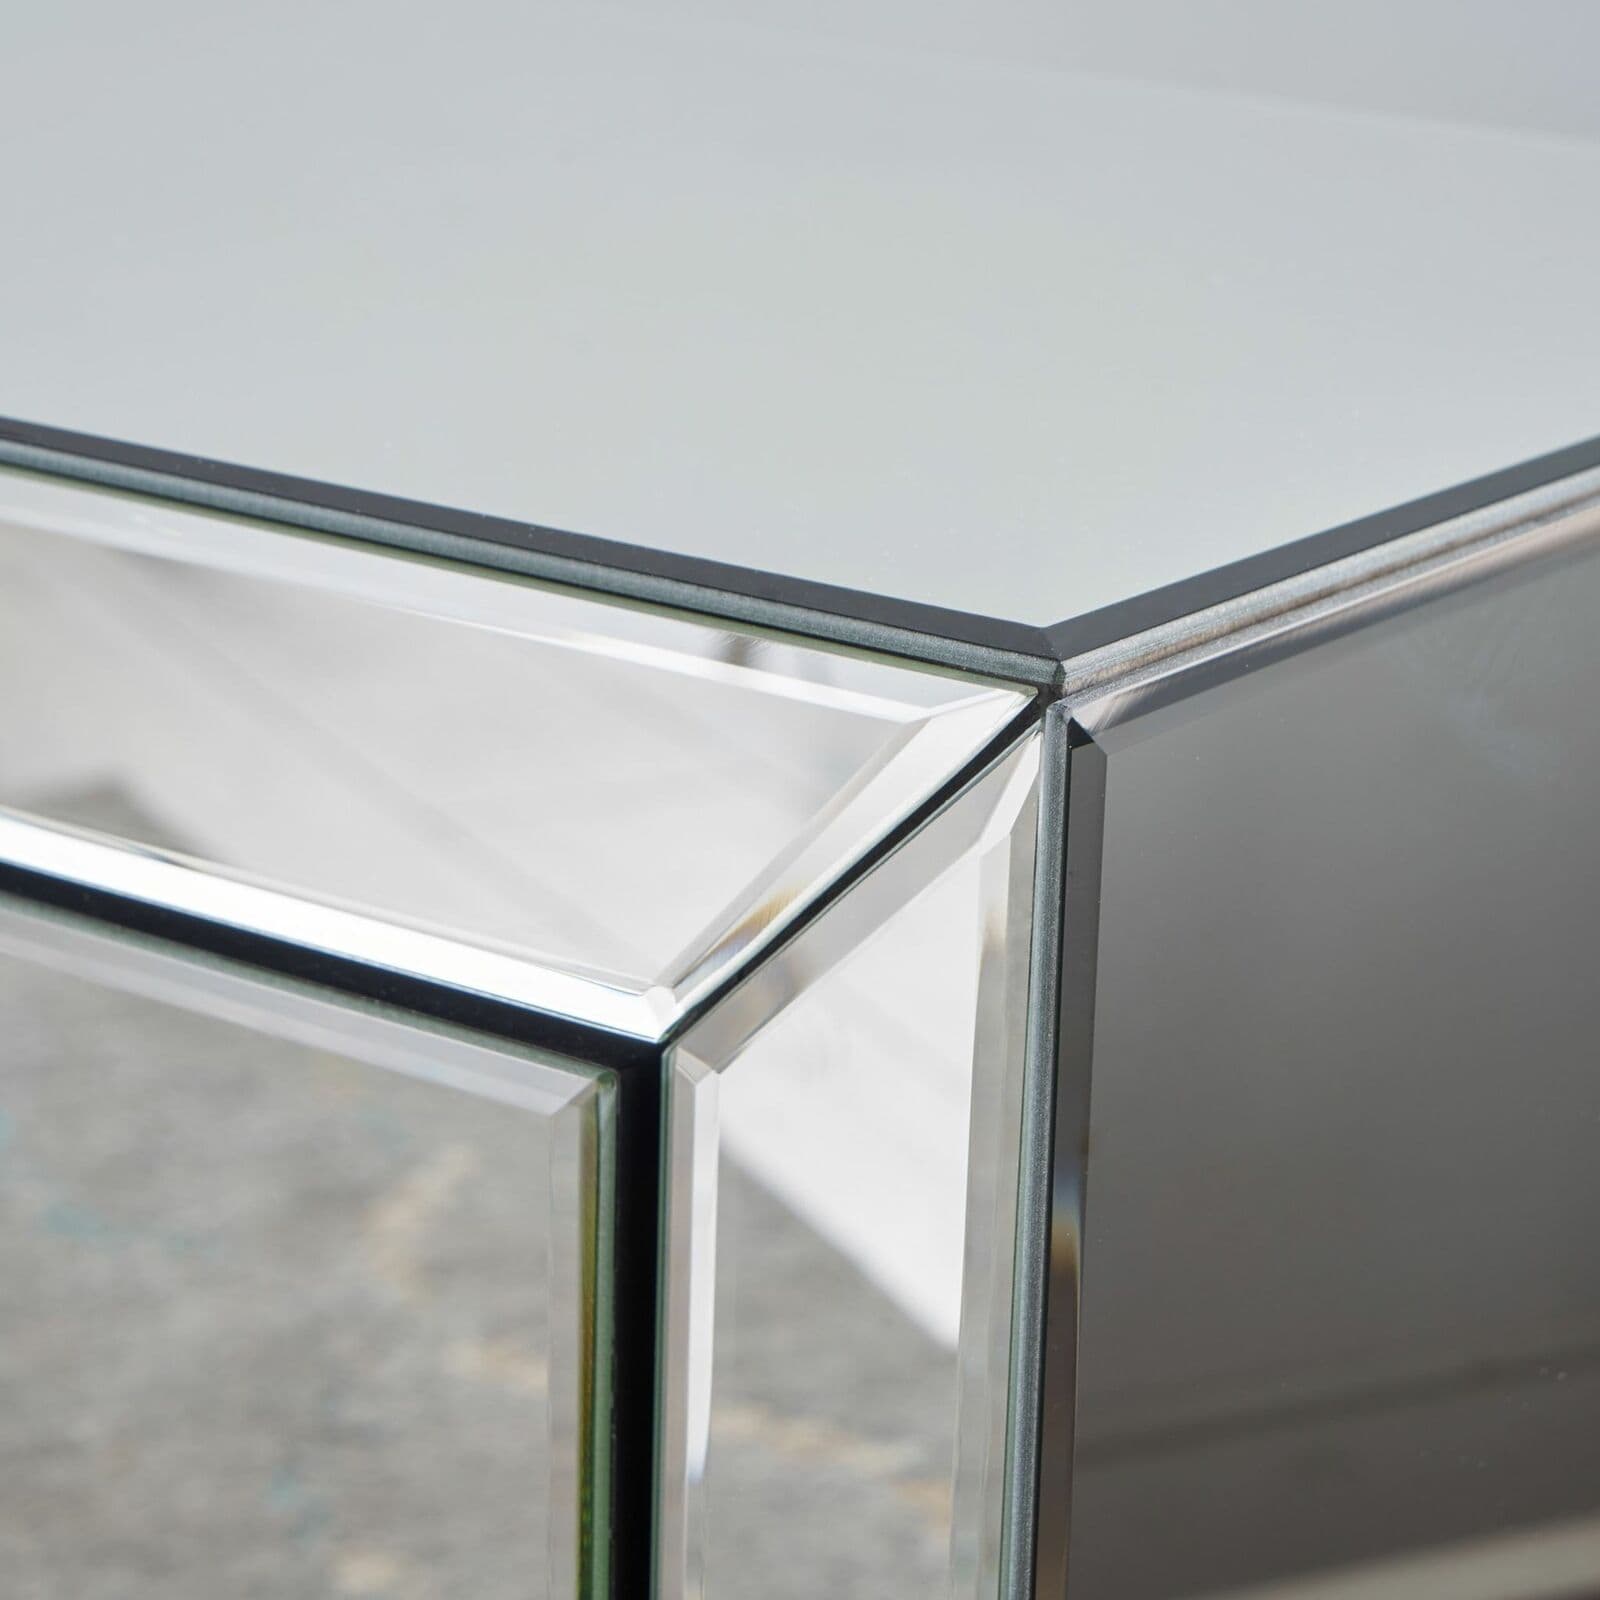 A close up of a mirrored side table.